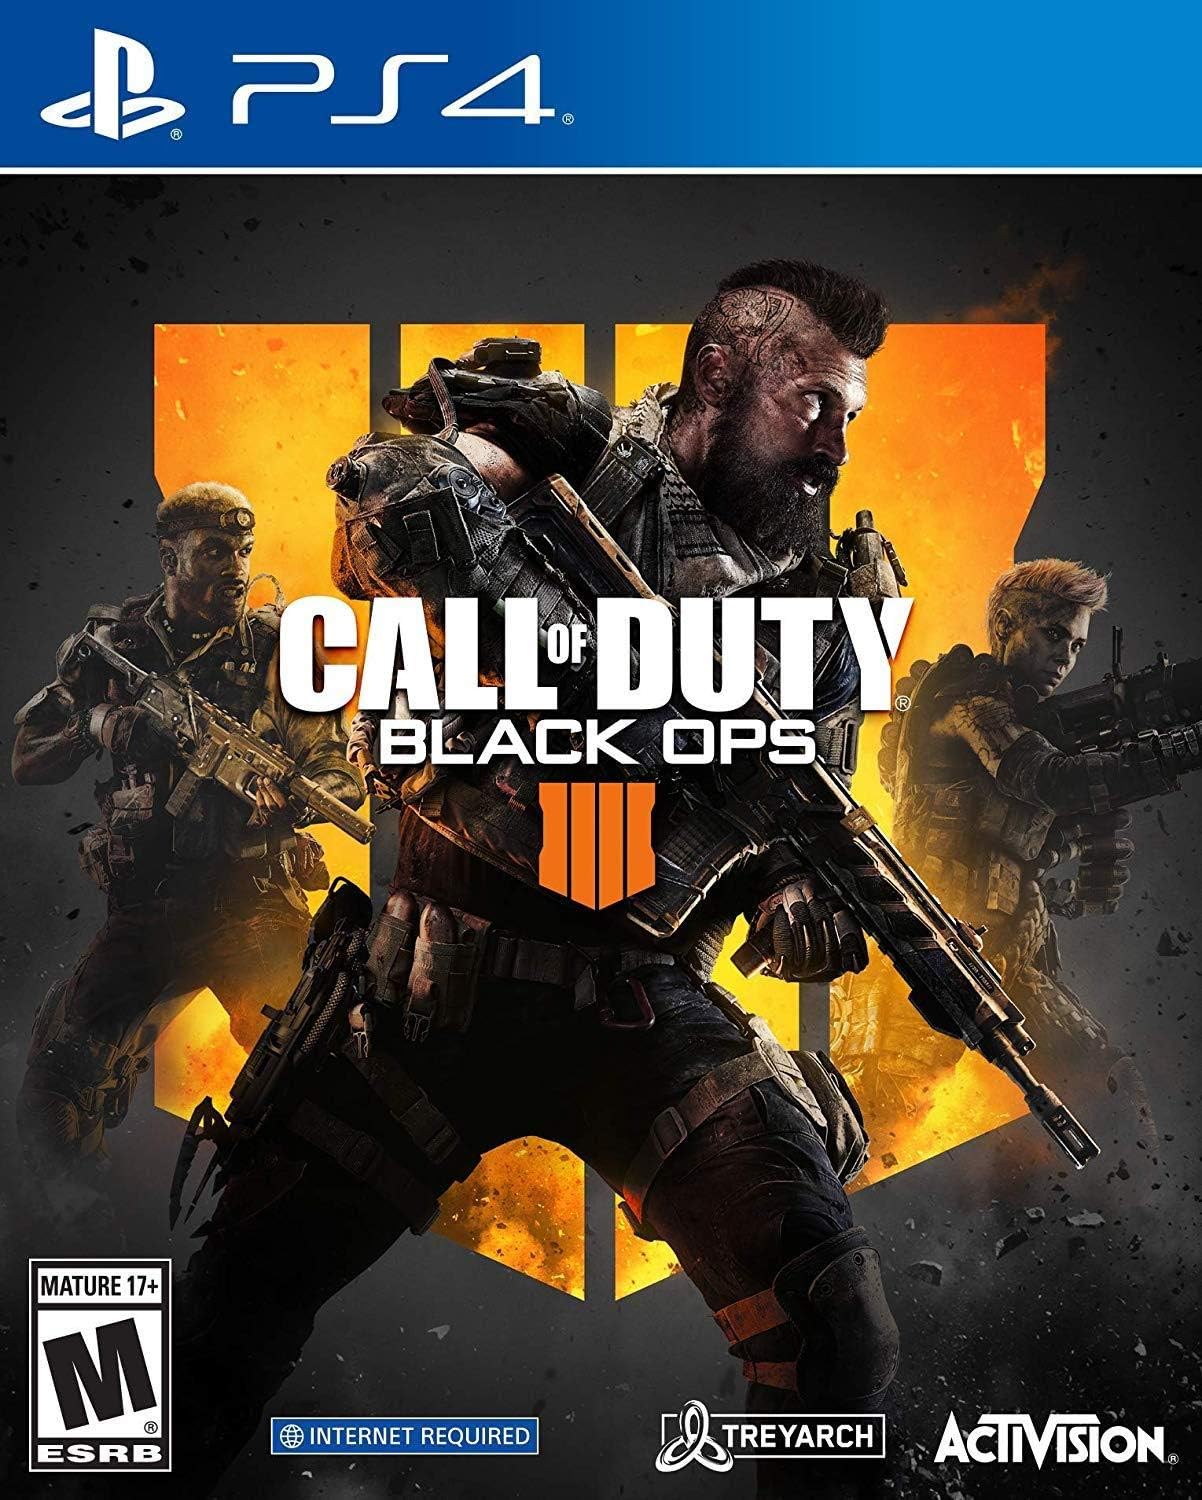 Call of Duty Black Ops III - Sony PlayStation 4 (PS4)